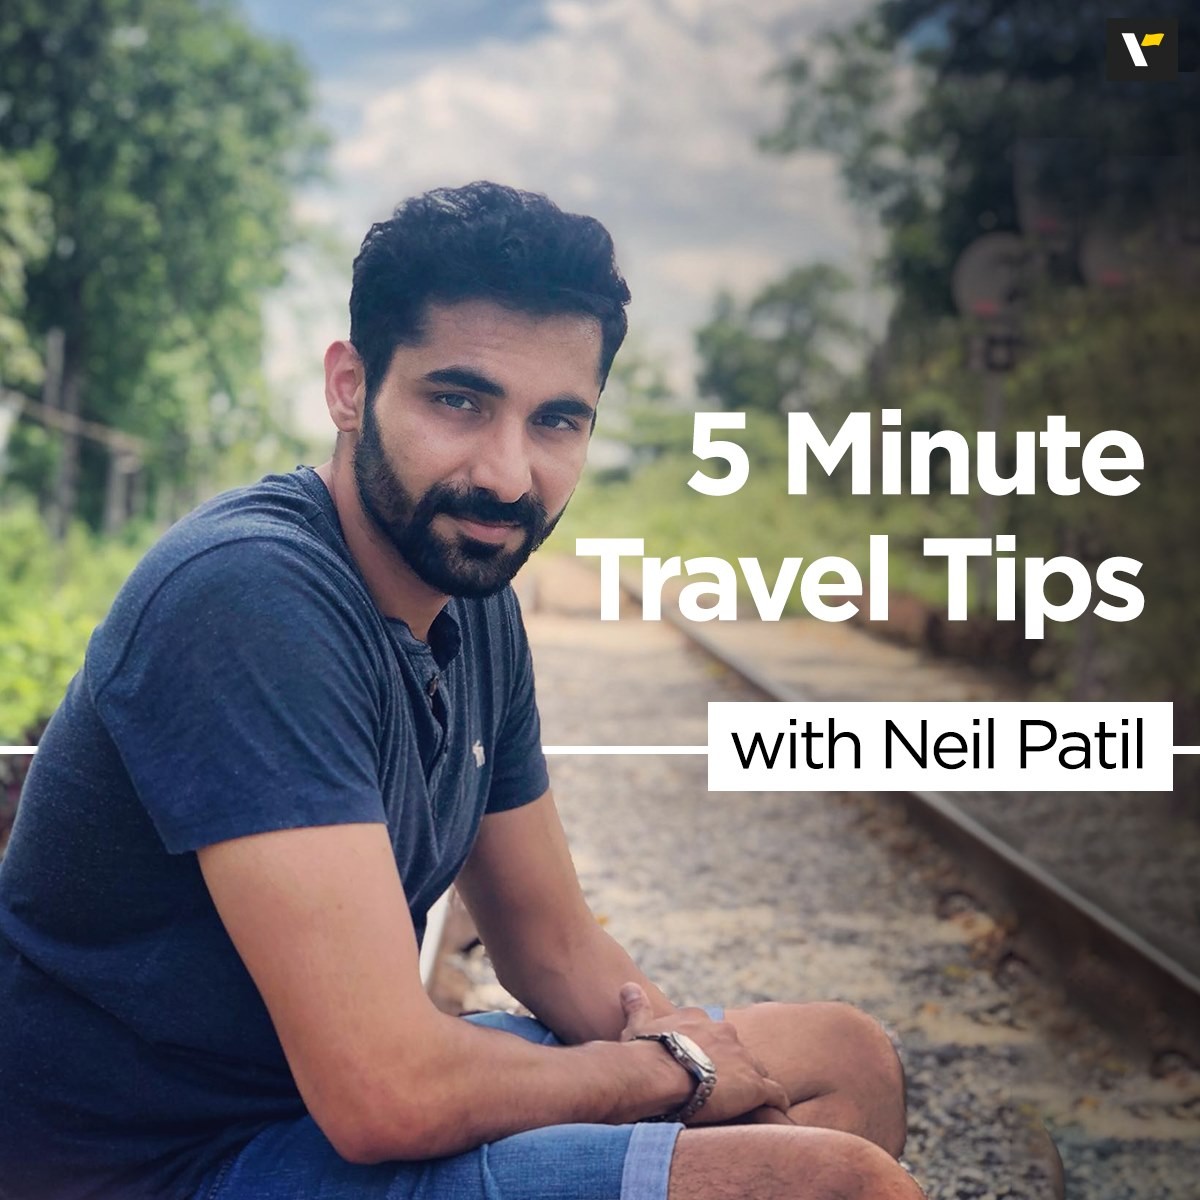 5 Minute Travel Tips with Neil Patil